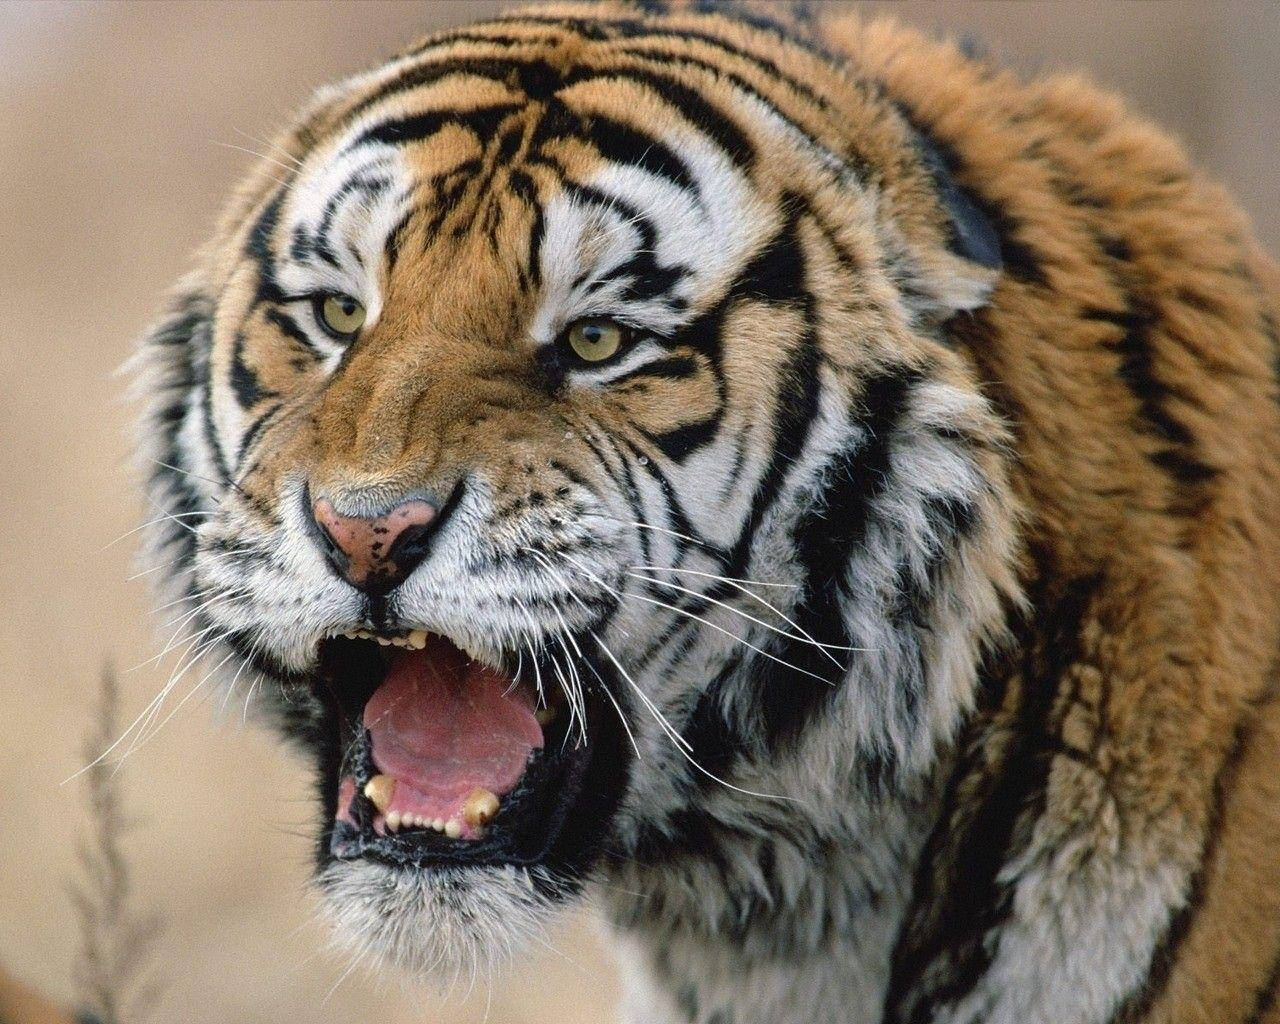 Growling Angry Tiger Background